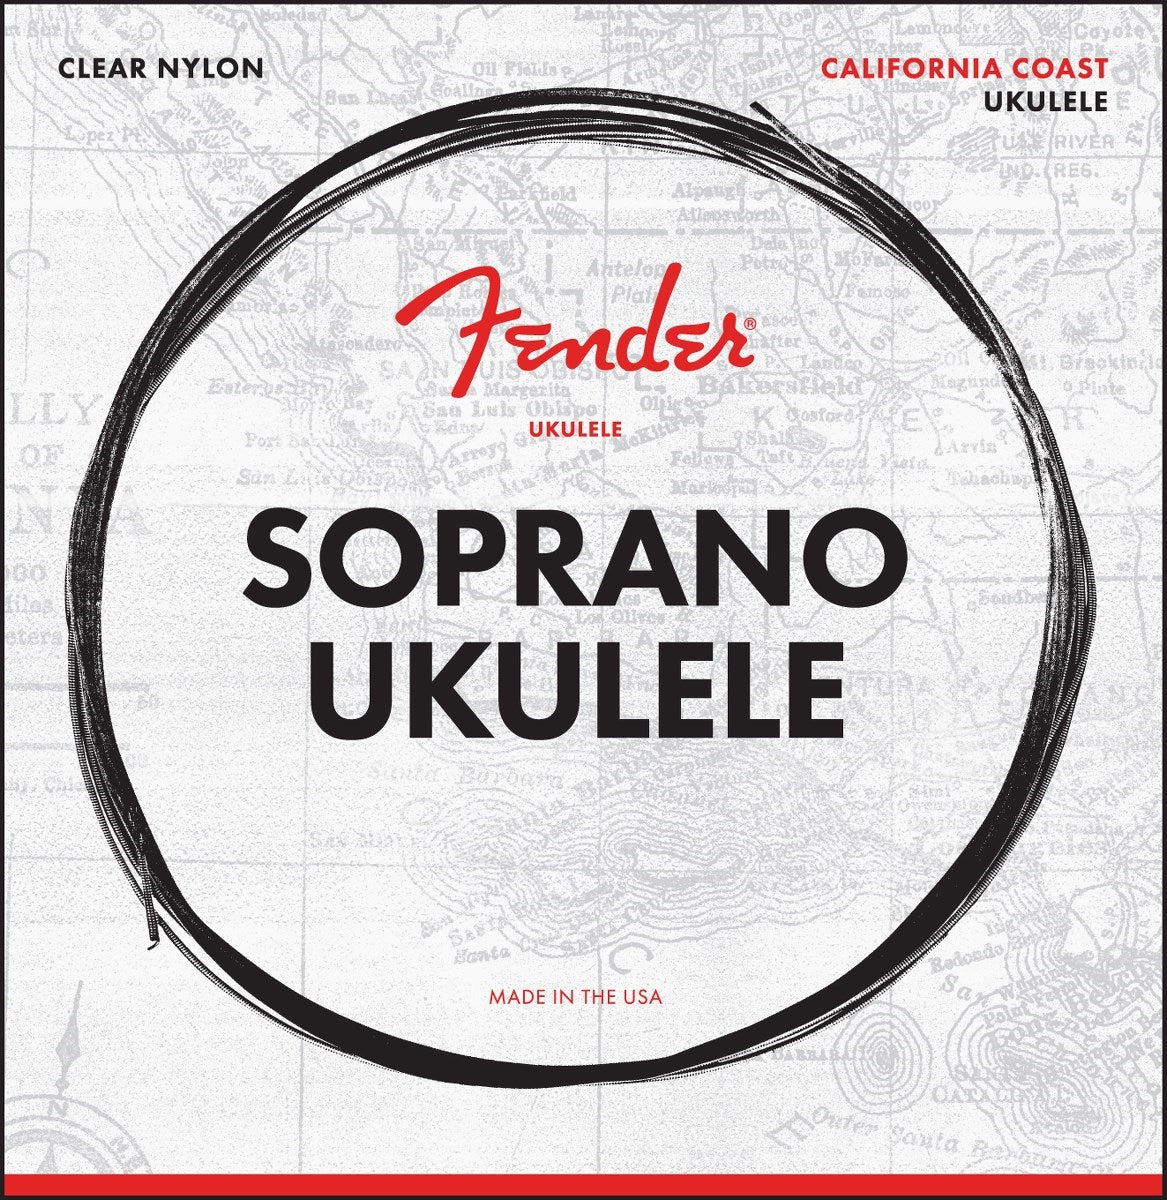 Fender California Coast Clear Nylon Ukulele String Set with Warm Clear Tones (Available in Soprano, Concert and Tenor)